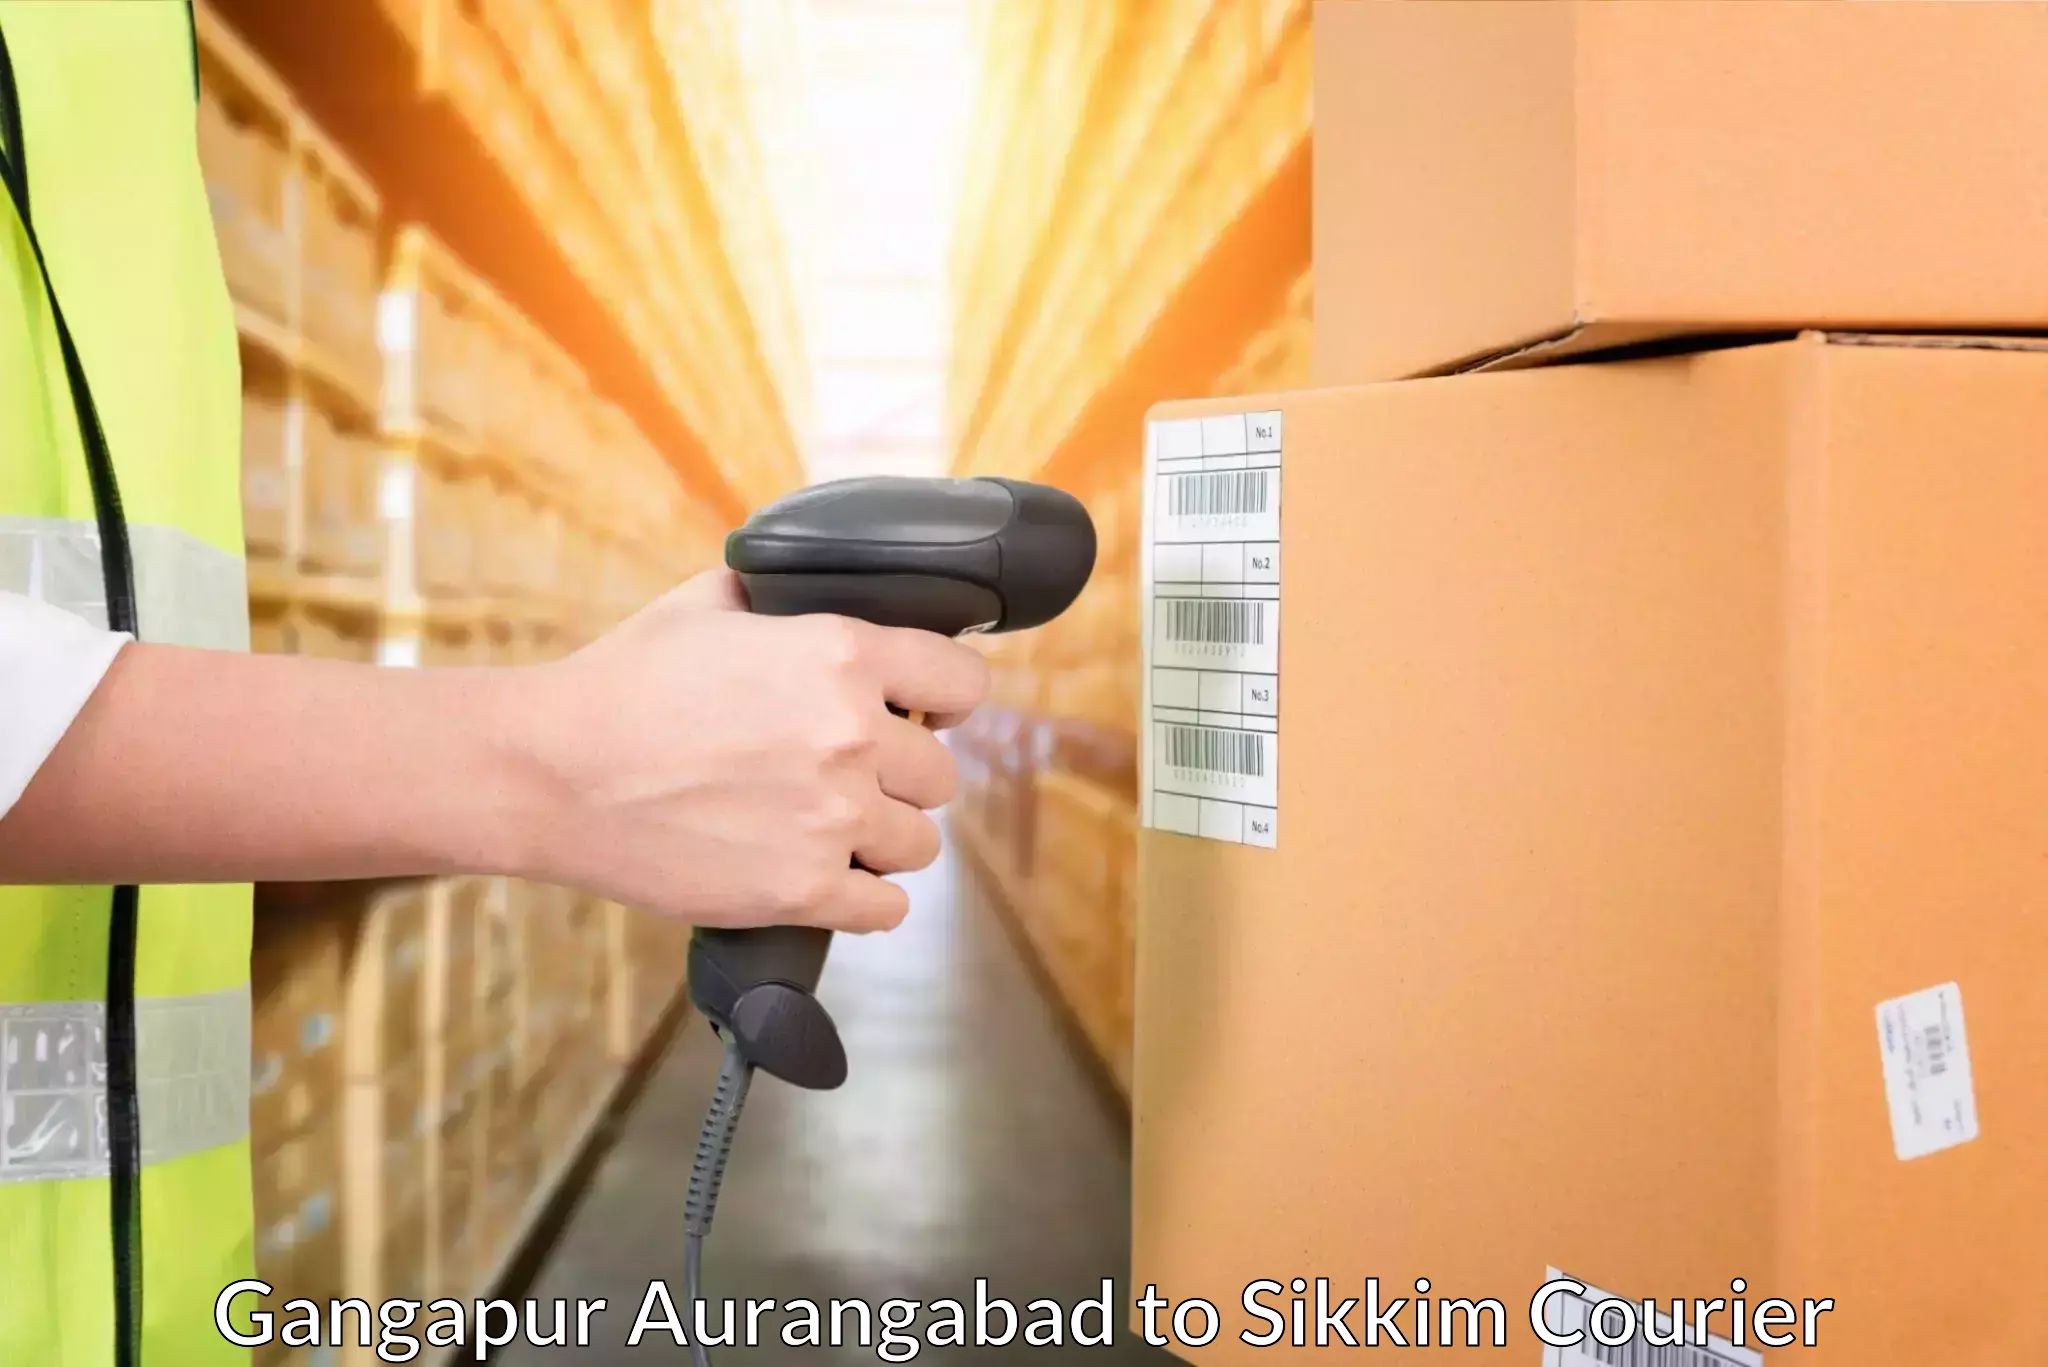 Same-day delivery solutions Gangapur Aurangabad to Geyzing